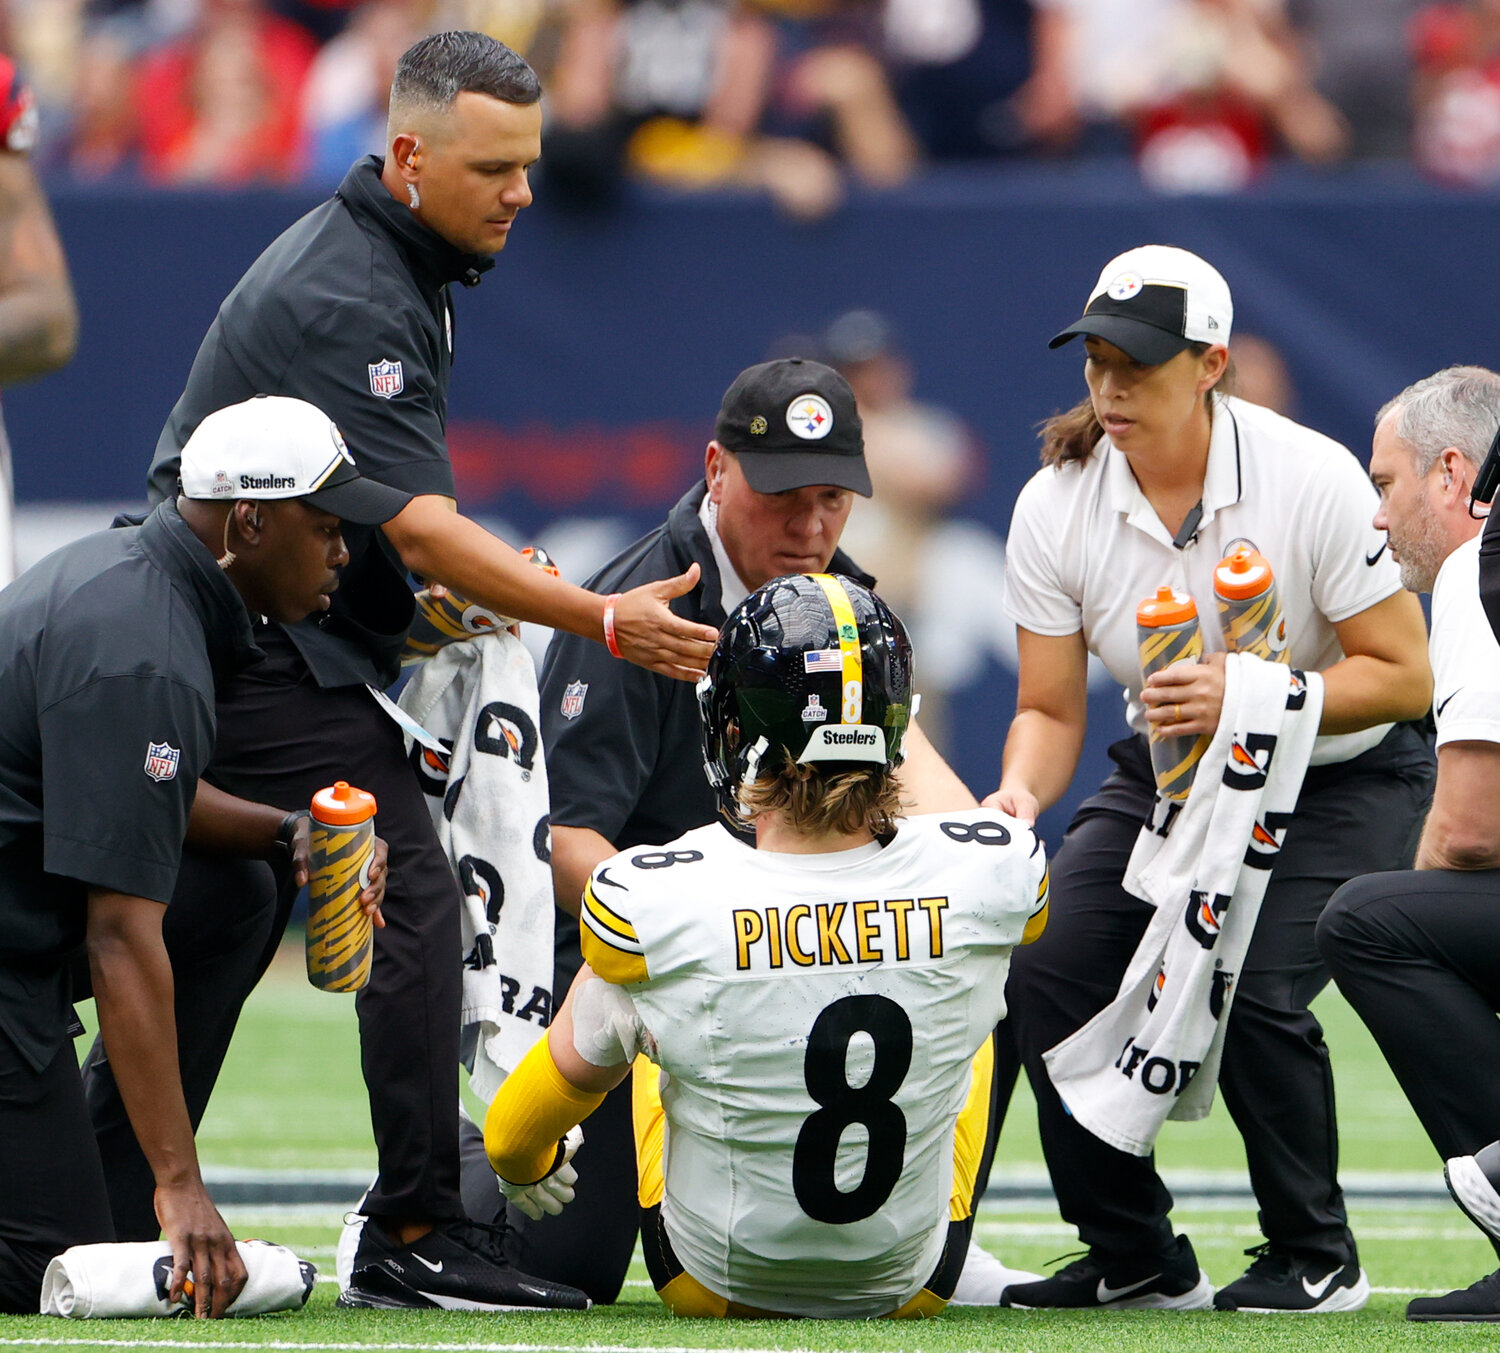 Team trainers check on Steelers quarterback Kenny Pickett (8) after a sack during an NFL game between the Houston Texans and the Pittsburgh Steelers on October 1, 2023 in Houston. Pickett left the game after suffering a reported leg injury.